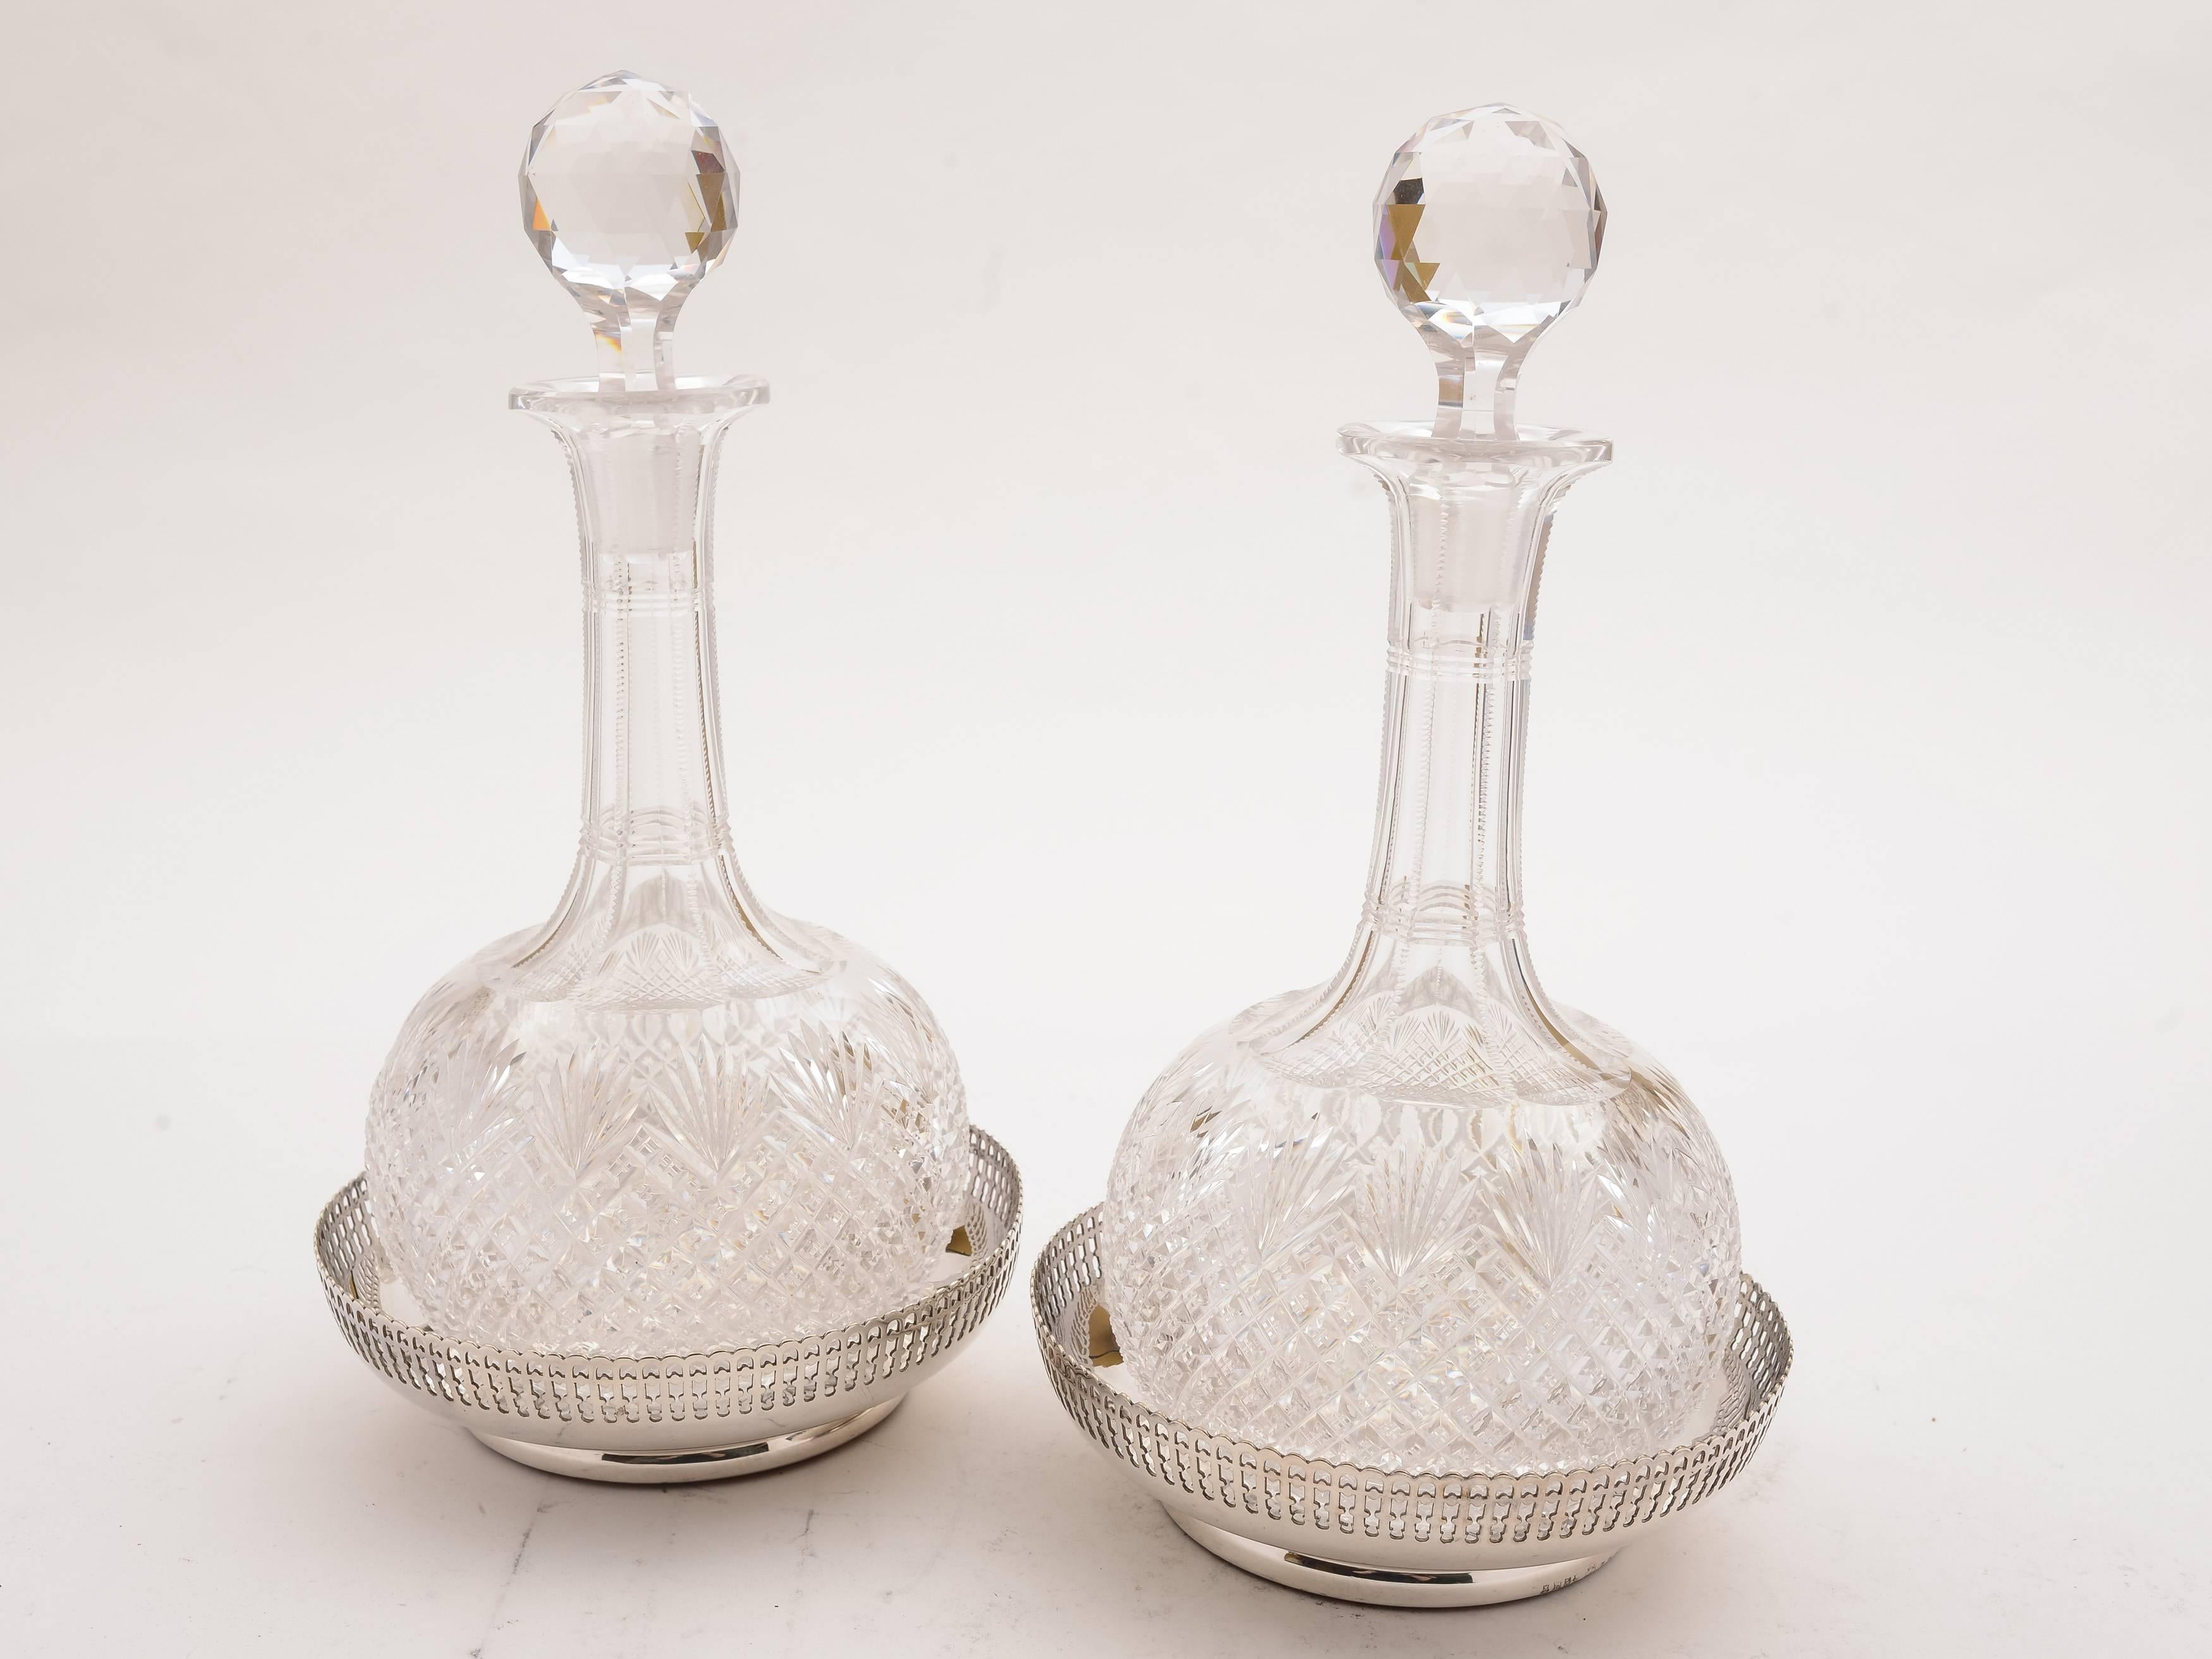 A gorgeous pair of English Victorian cut glass decanters with lovely cut decoration, original stoppers and silver plated decanter labels for sherry and brandy. Come with 2 silver plated and wooden-based coasters which have pierced galleries and